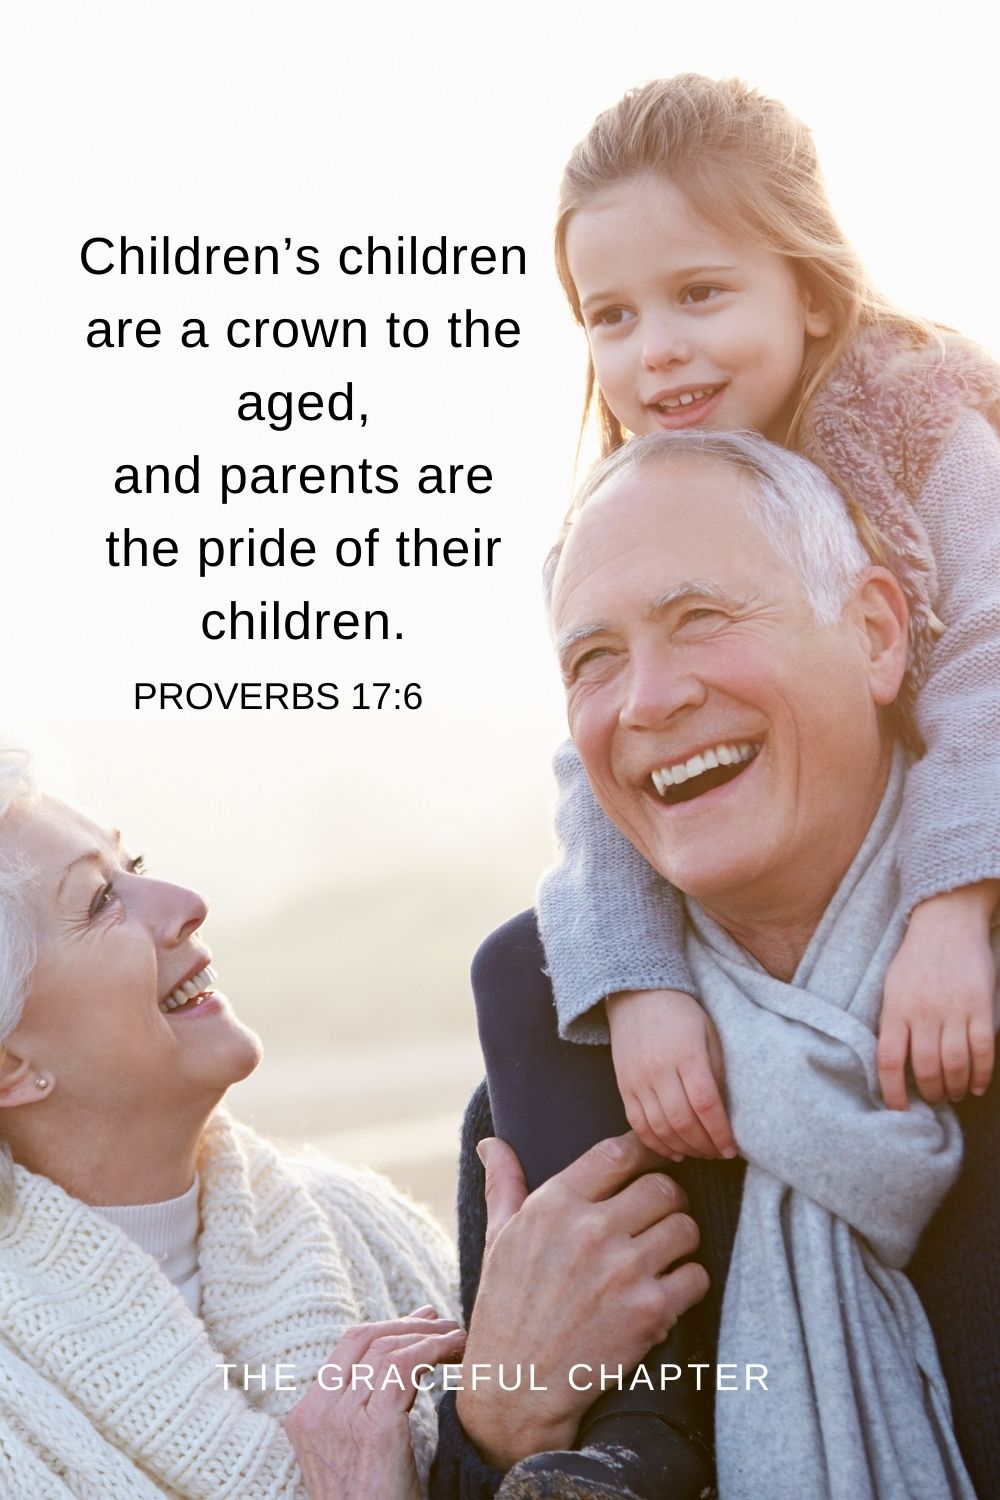 Children’s children are a crown to the aged, and parents are the pride of their children. Proverbs 17:6